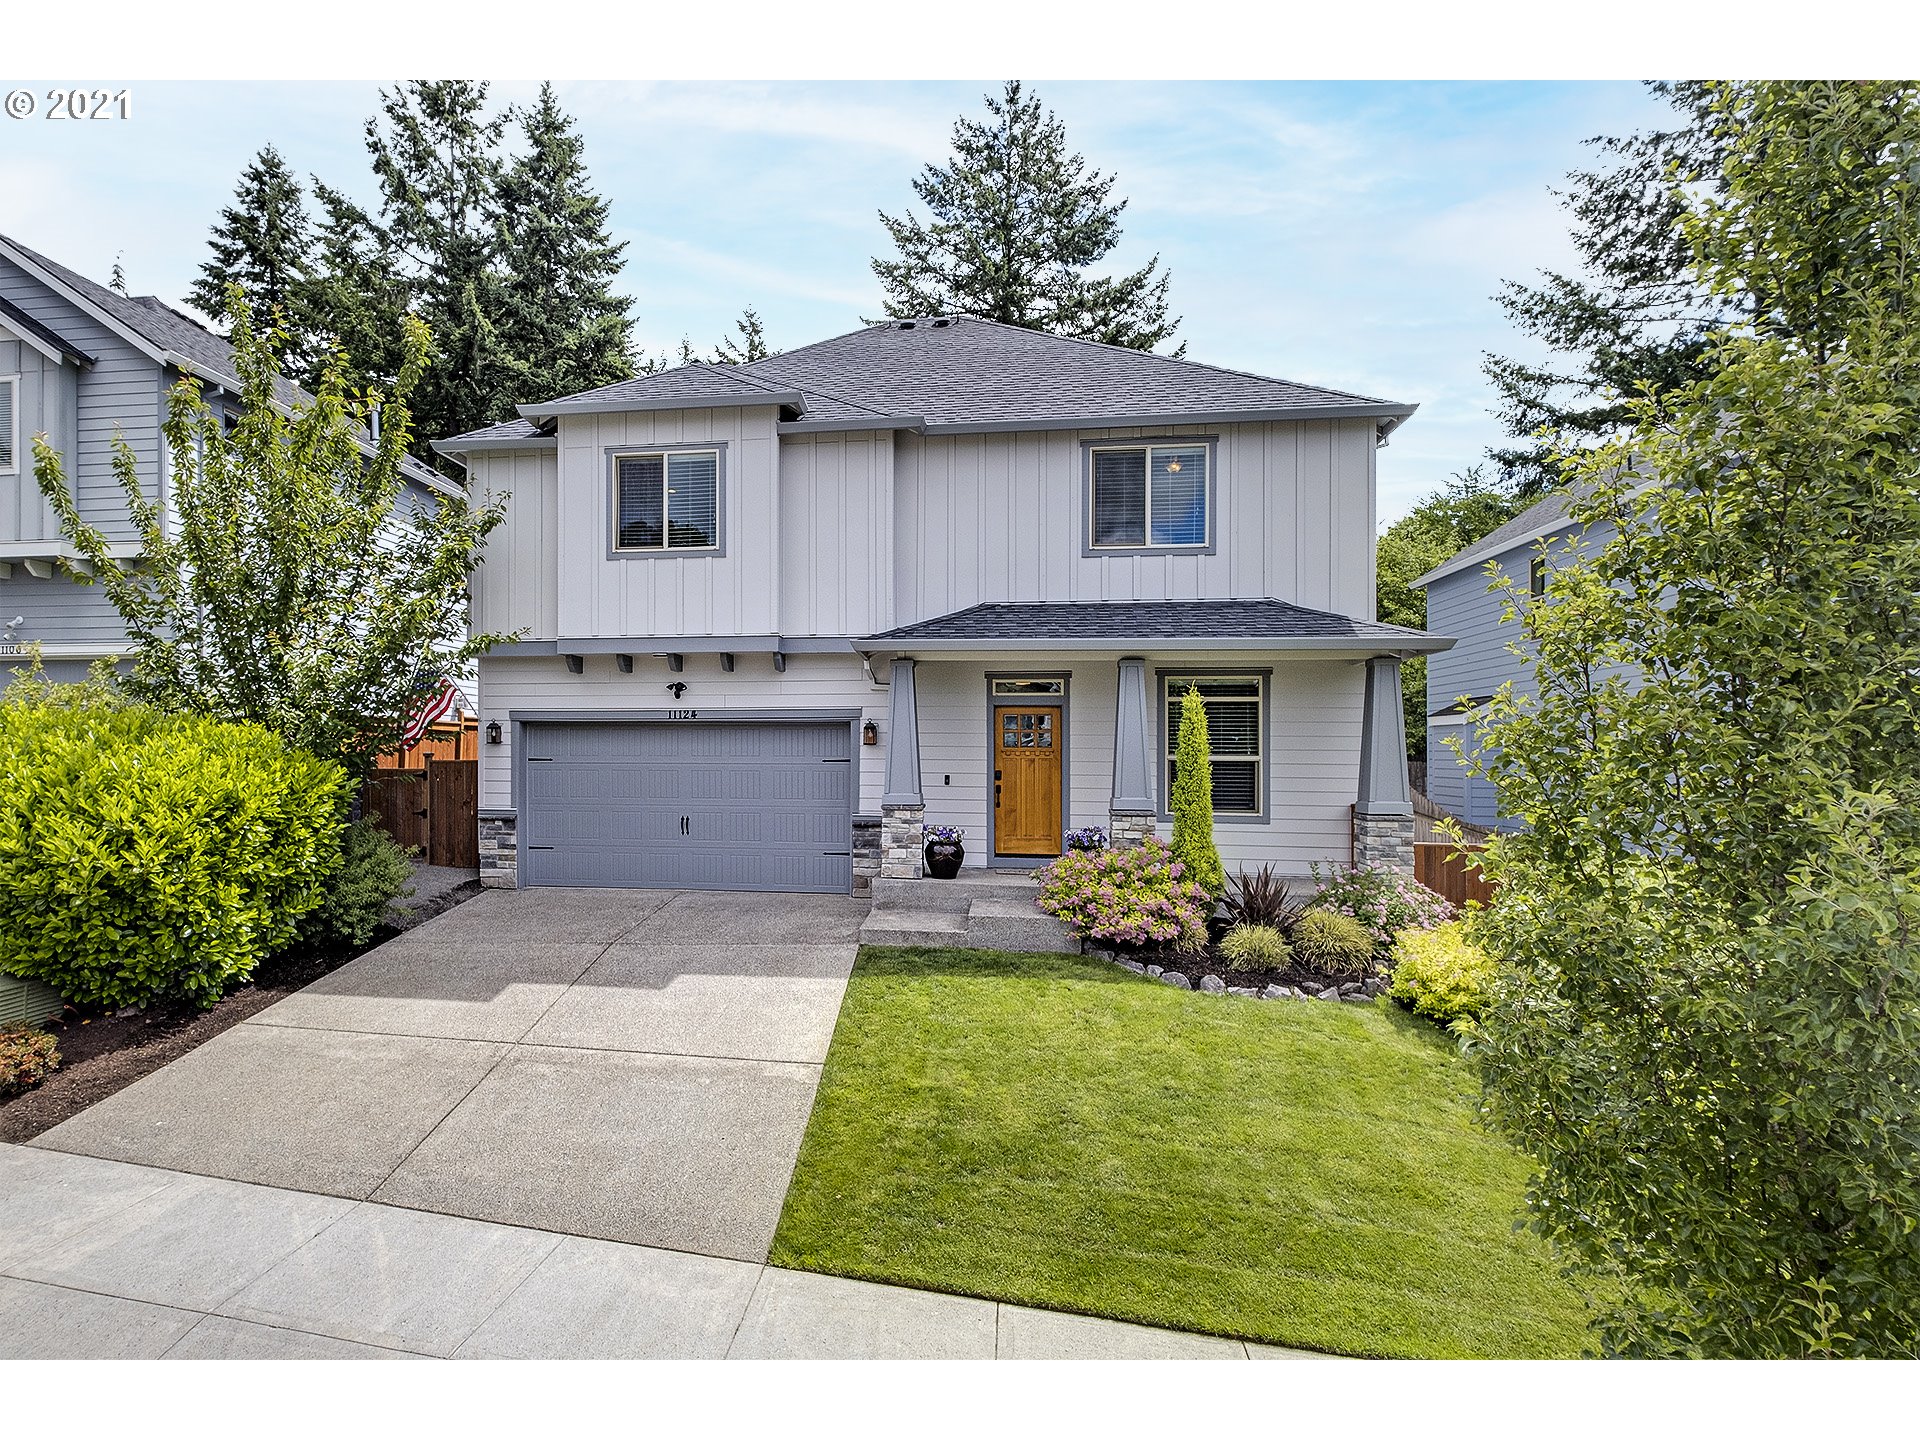 11124 SE 100TH AVE (1 of 22)